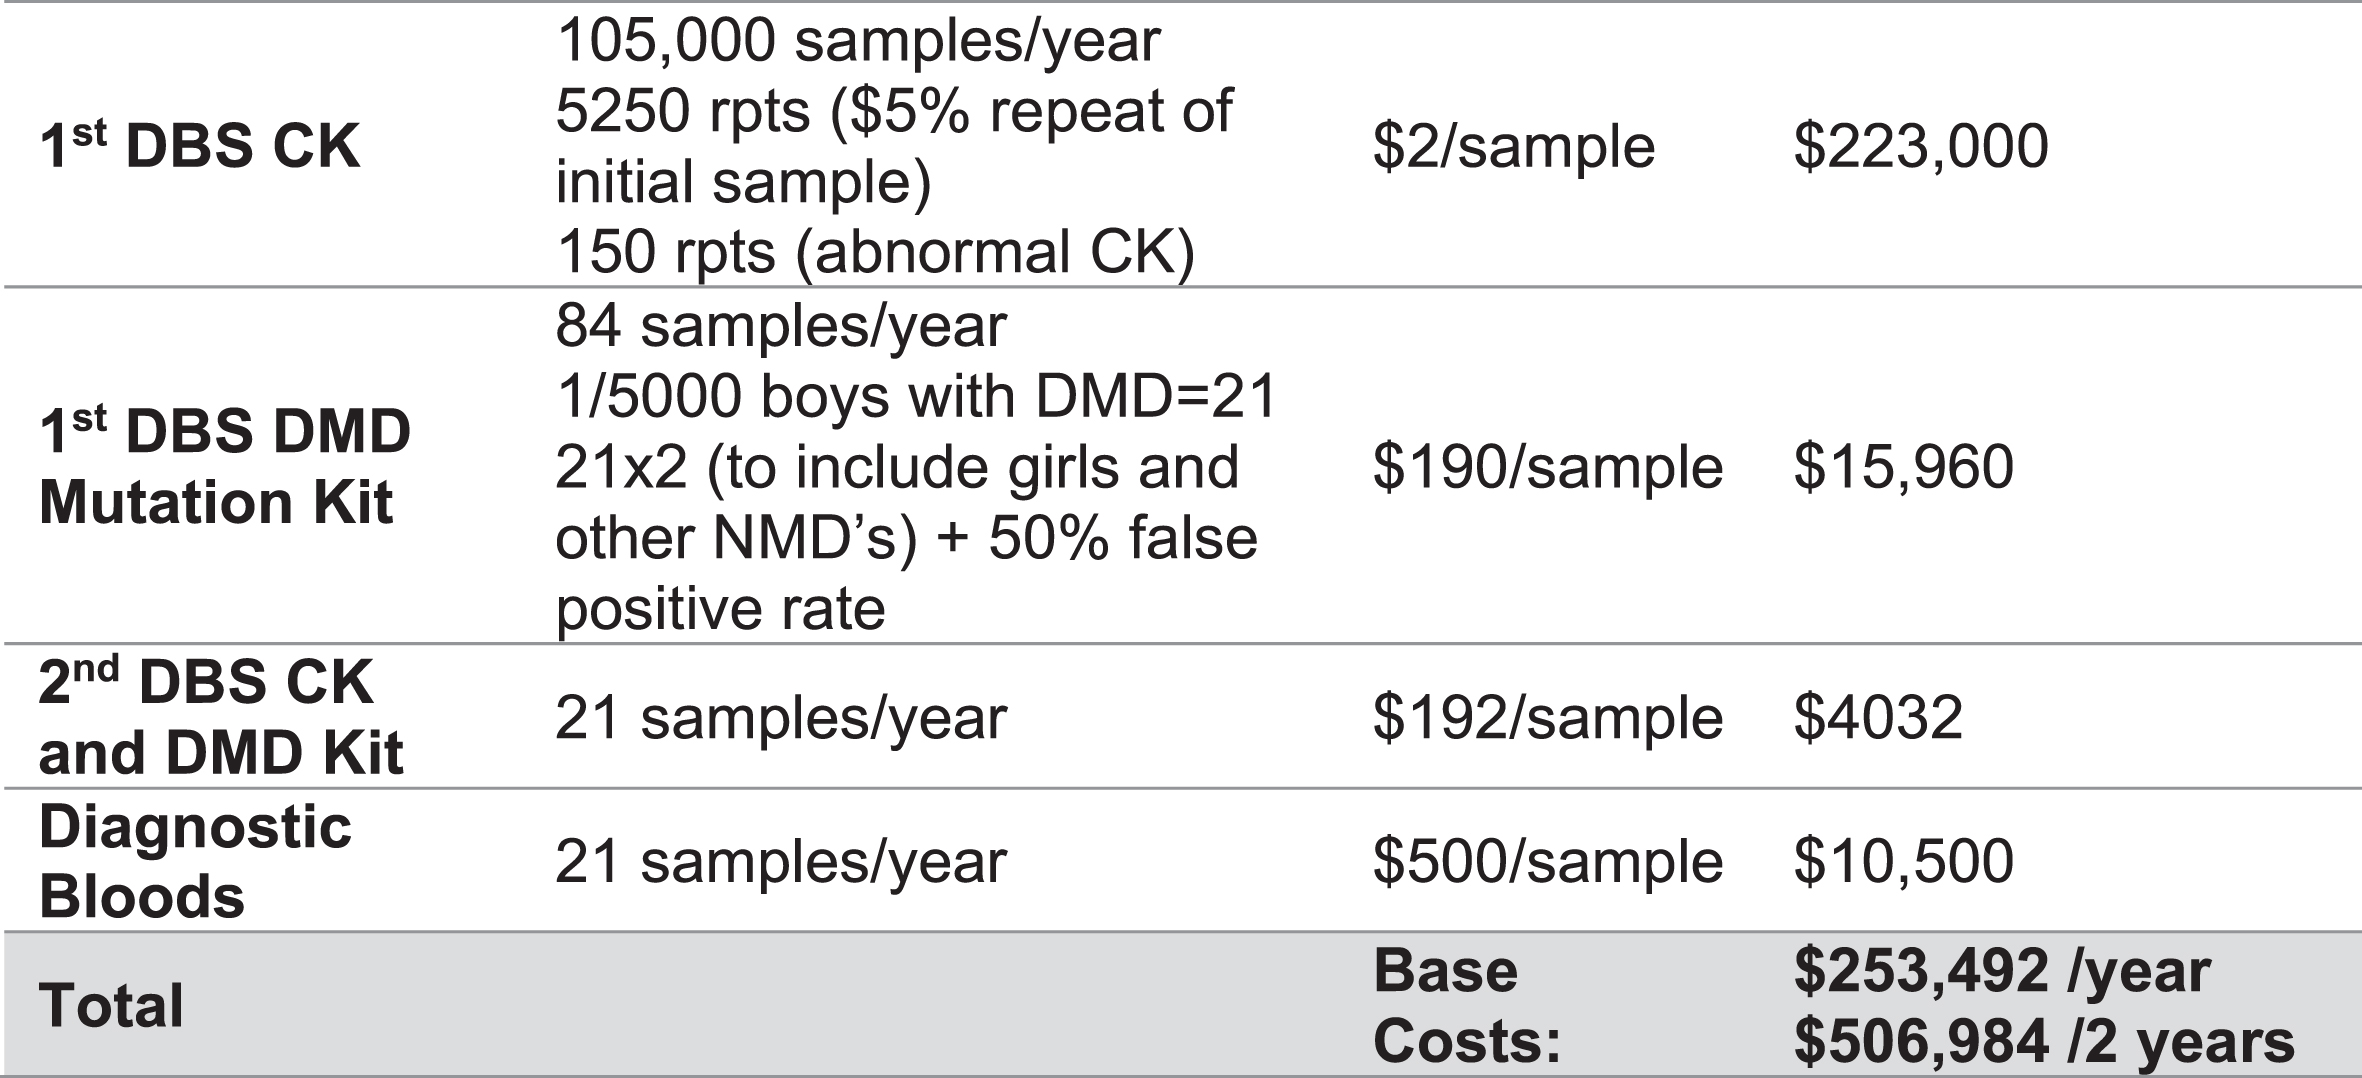 Estimated cost analysis for the screening and diagnostic pathway for Duchenne muscular dystrophy over the course of the two-year pilot program. Costs are based on prior annual newborn screening numbers across NSW/ACT. DMD = Duchenne muscular dystrophy, DBS = Dried blood spot.